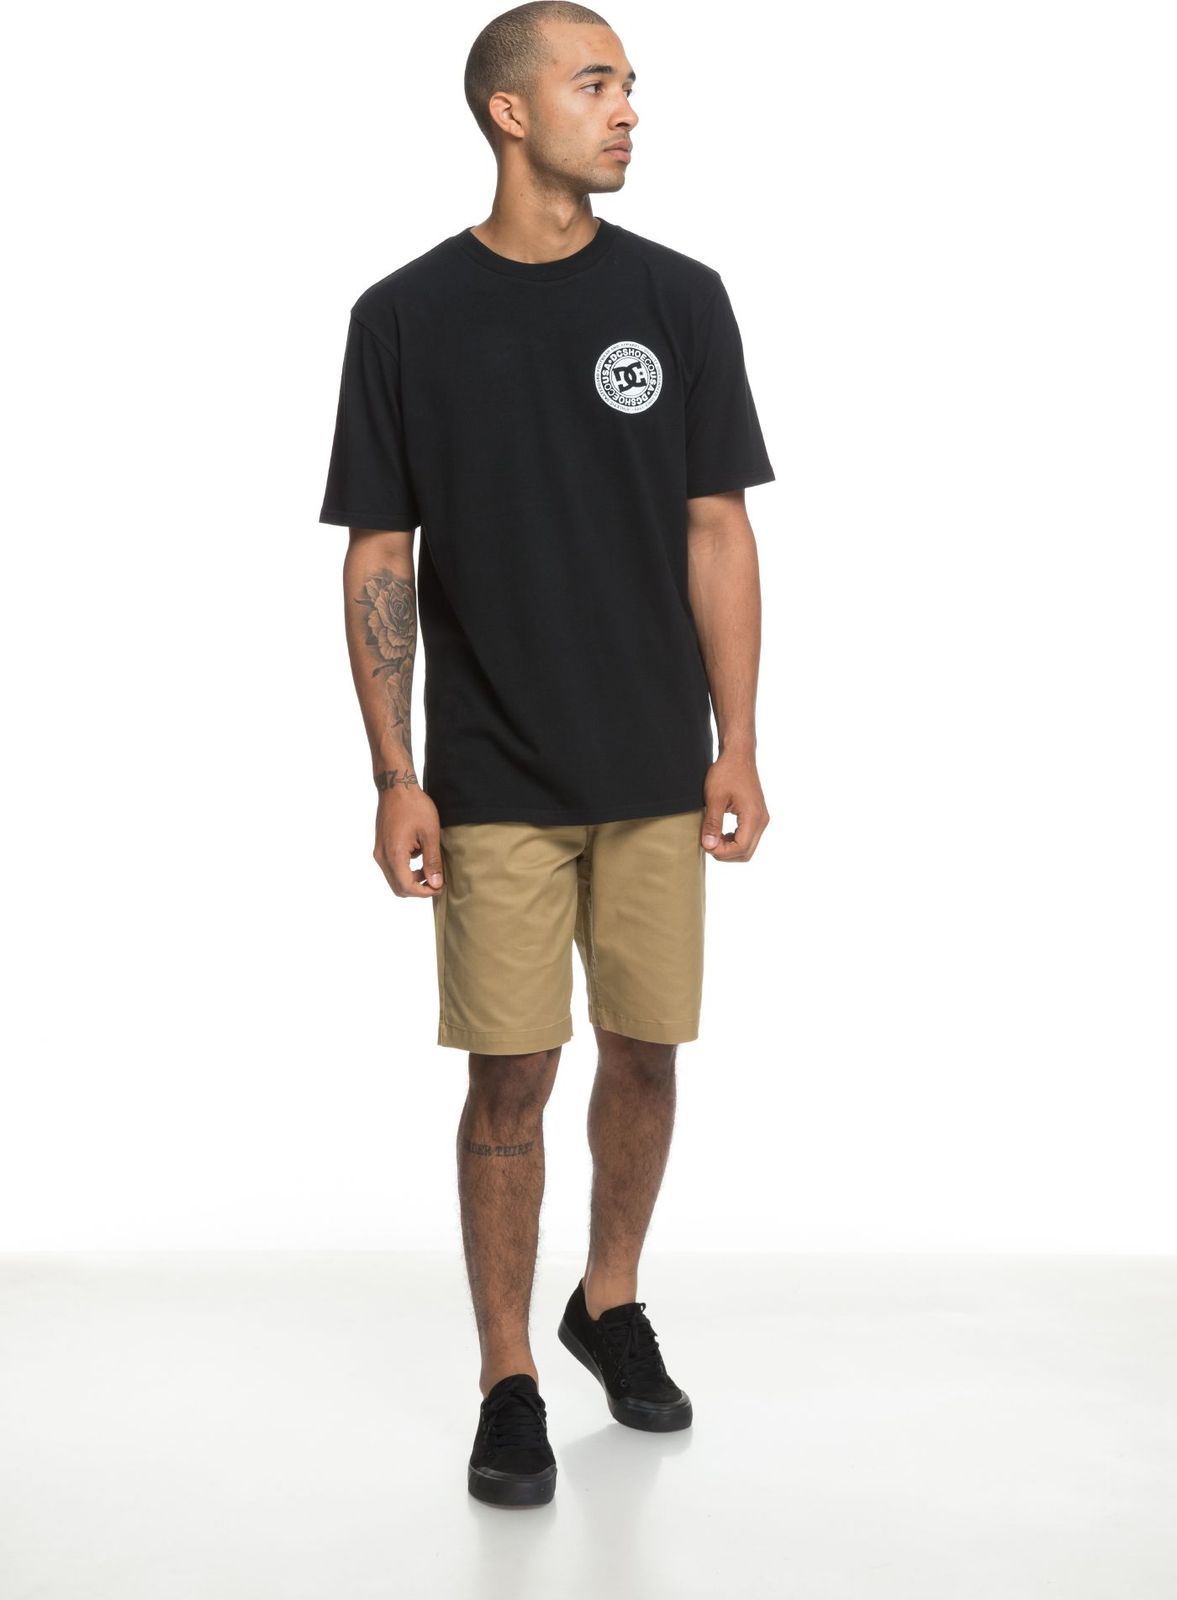   DC Shoes Worker Straight, : . EDYWS03111-CLM0.  33 (48)